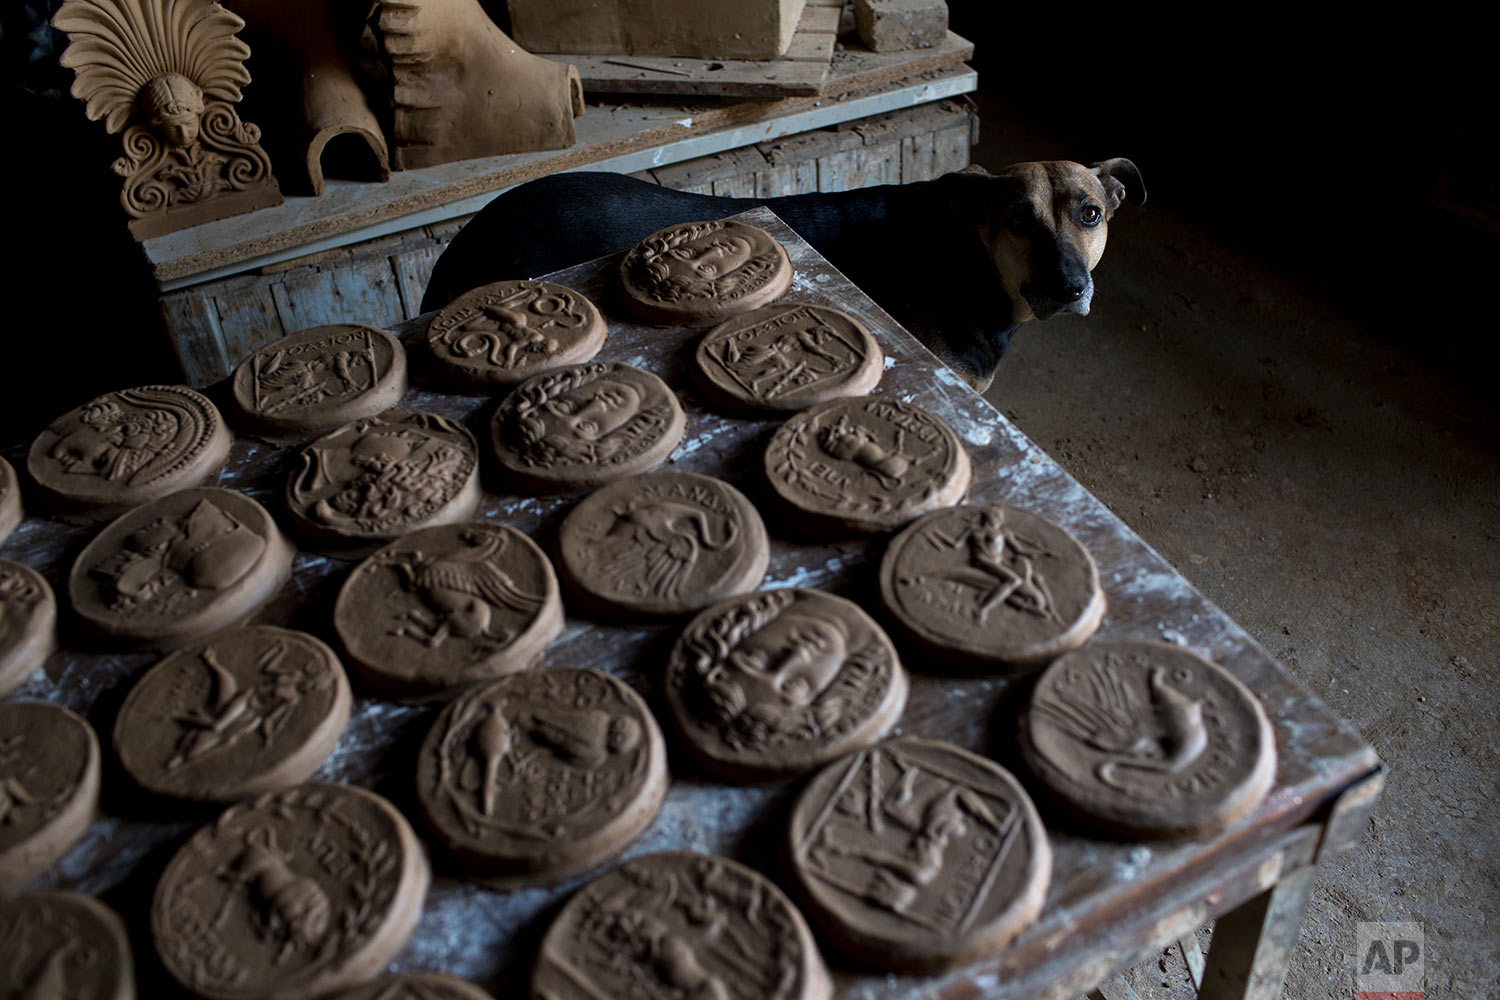  In this Friday, Oct. 13, 2017 photo a dog stands next to ceramic medallions based on ancient Greek coins in Haralambos Goumas' sculpture and ceramic workshop, in the Egaleo suburb of Athens. (AP Photo/Petros Giannakouris) 